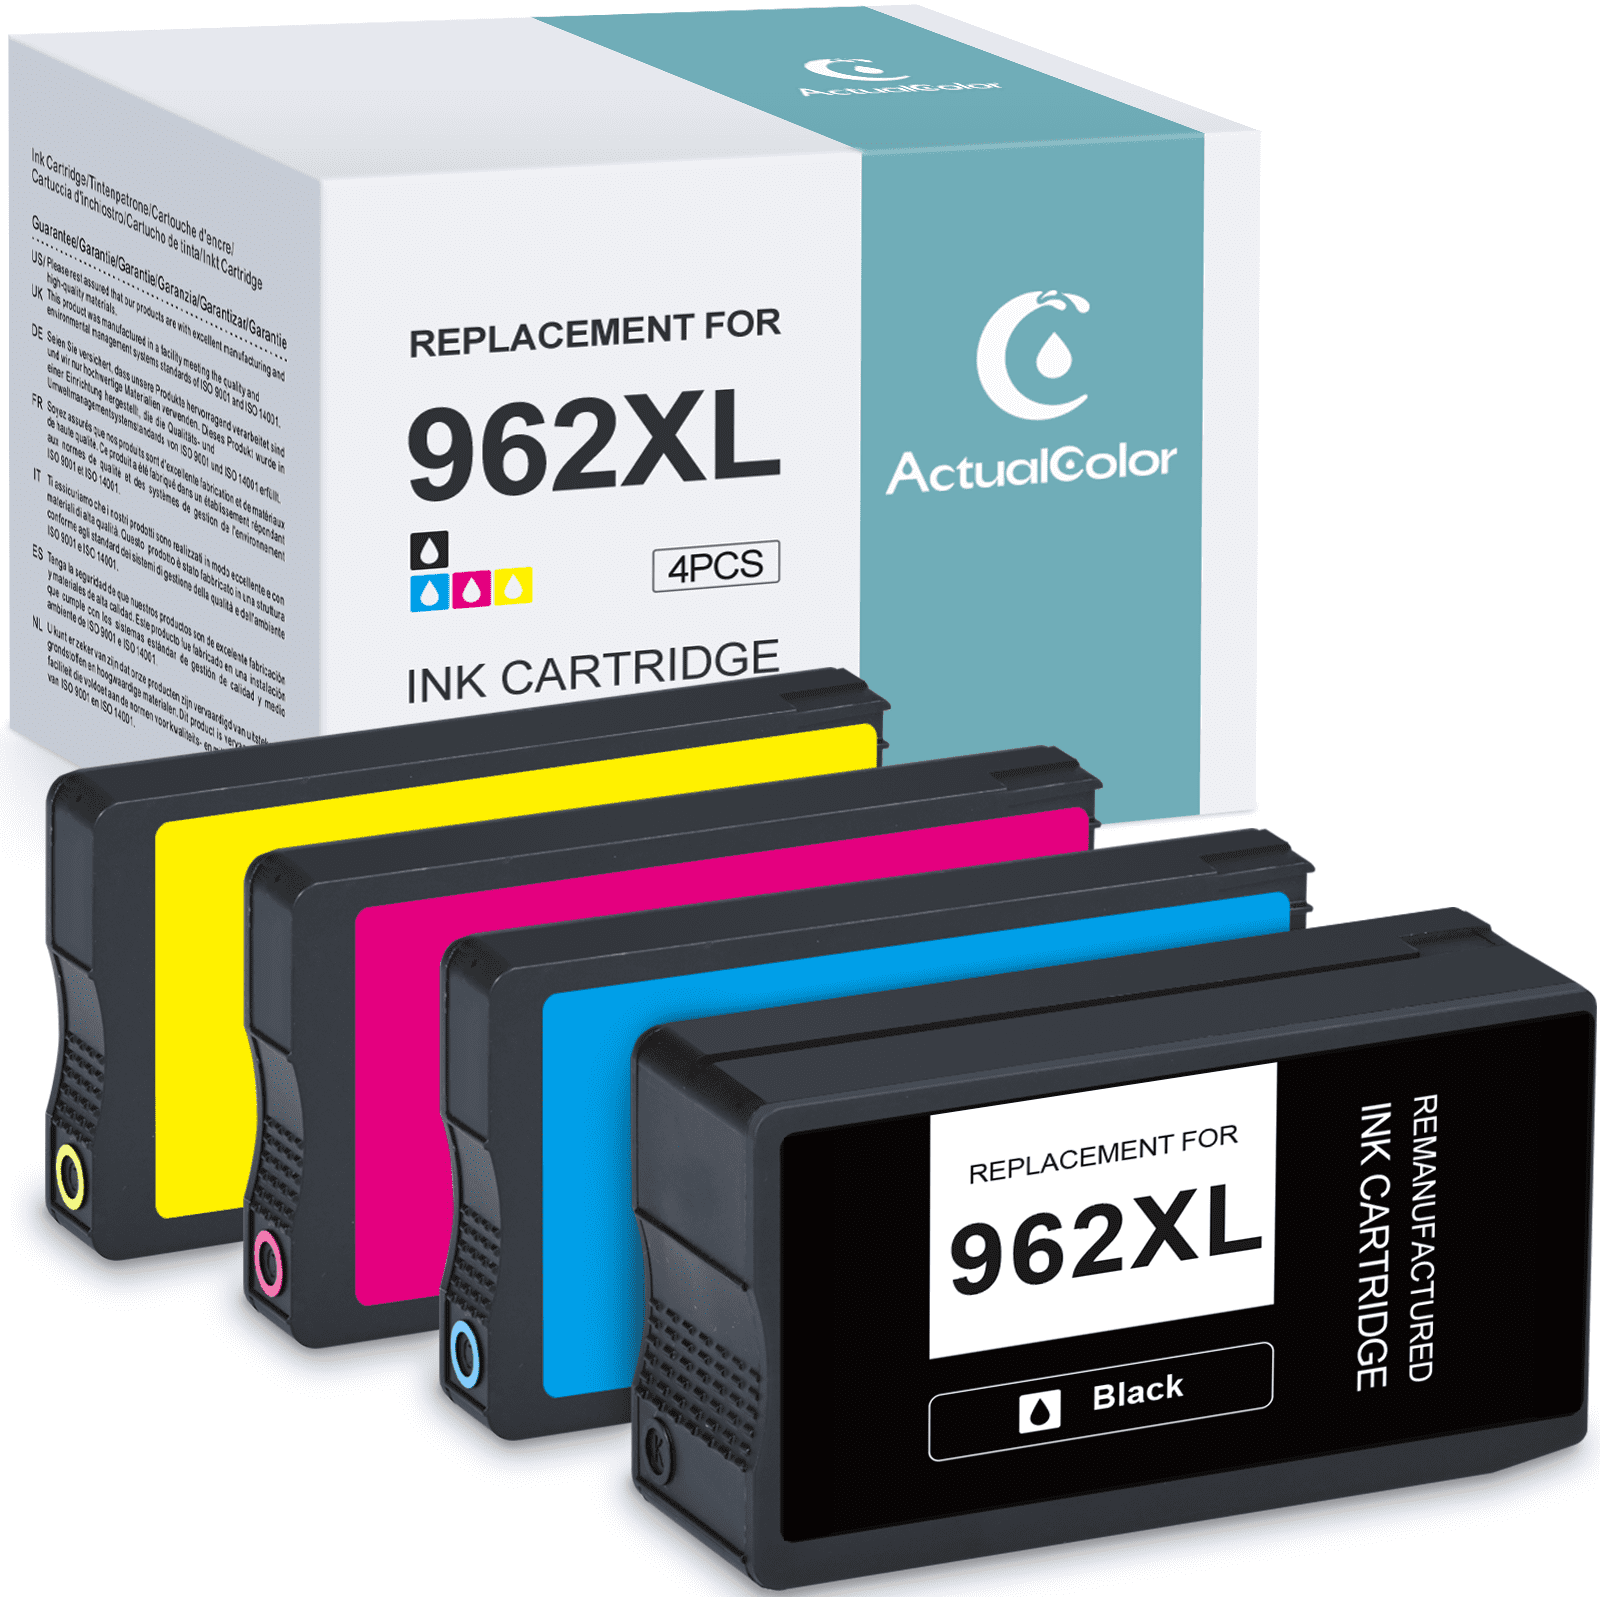 962XL Ink Cartridge for HP 962 XL 962XL for Use with HP OfficeJet Pro 9010 9016 9025 9020 9018 9012 9026 9027 9028 9029 Printer ( 1 Black, 1 1 Magenta, 1 Yellow） - Walmart.com